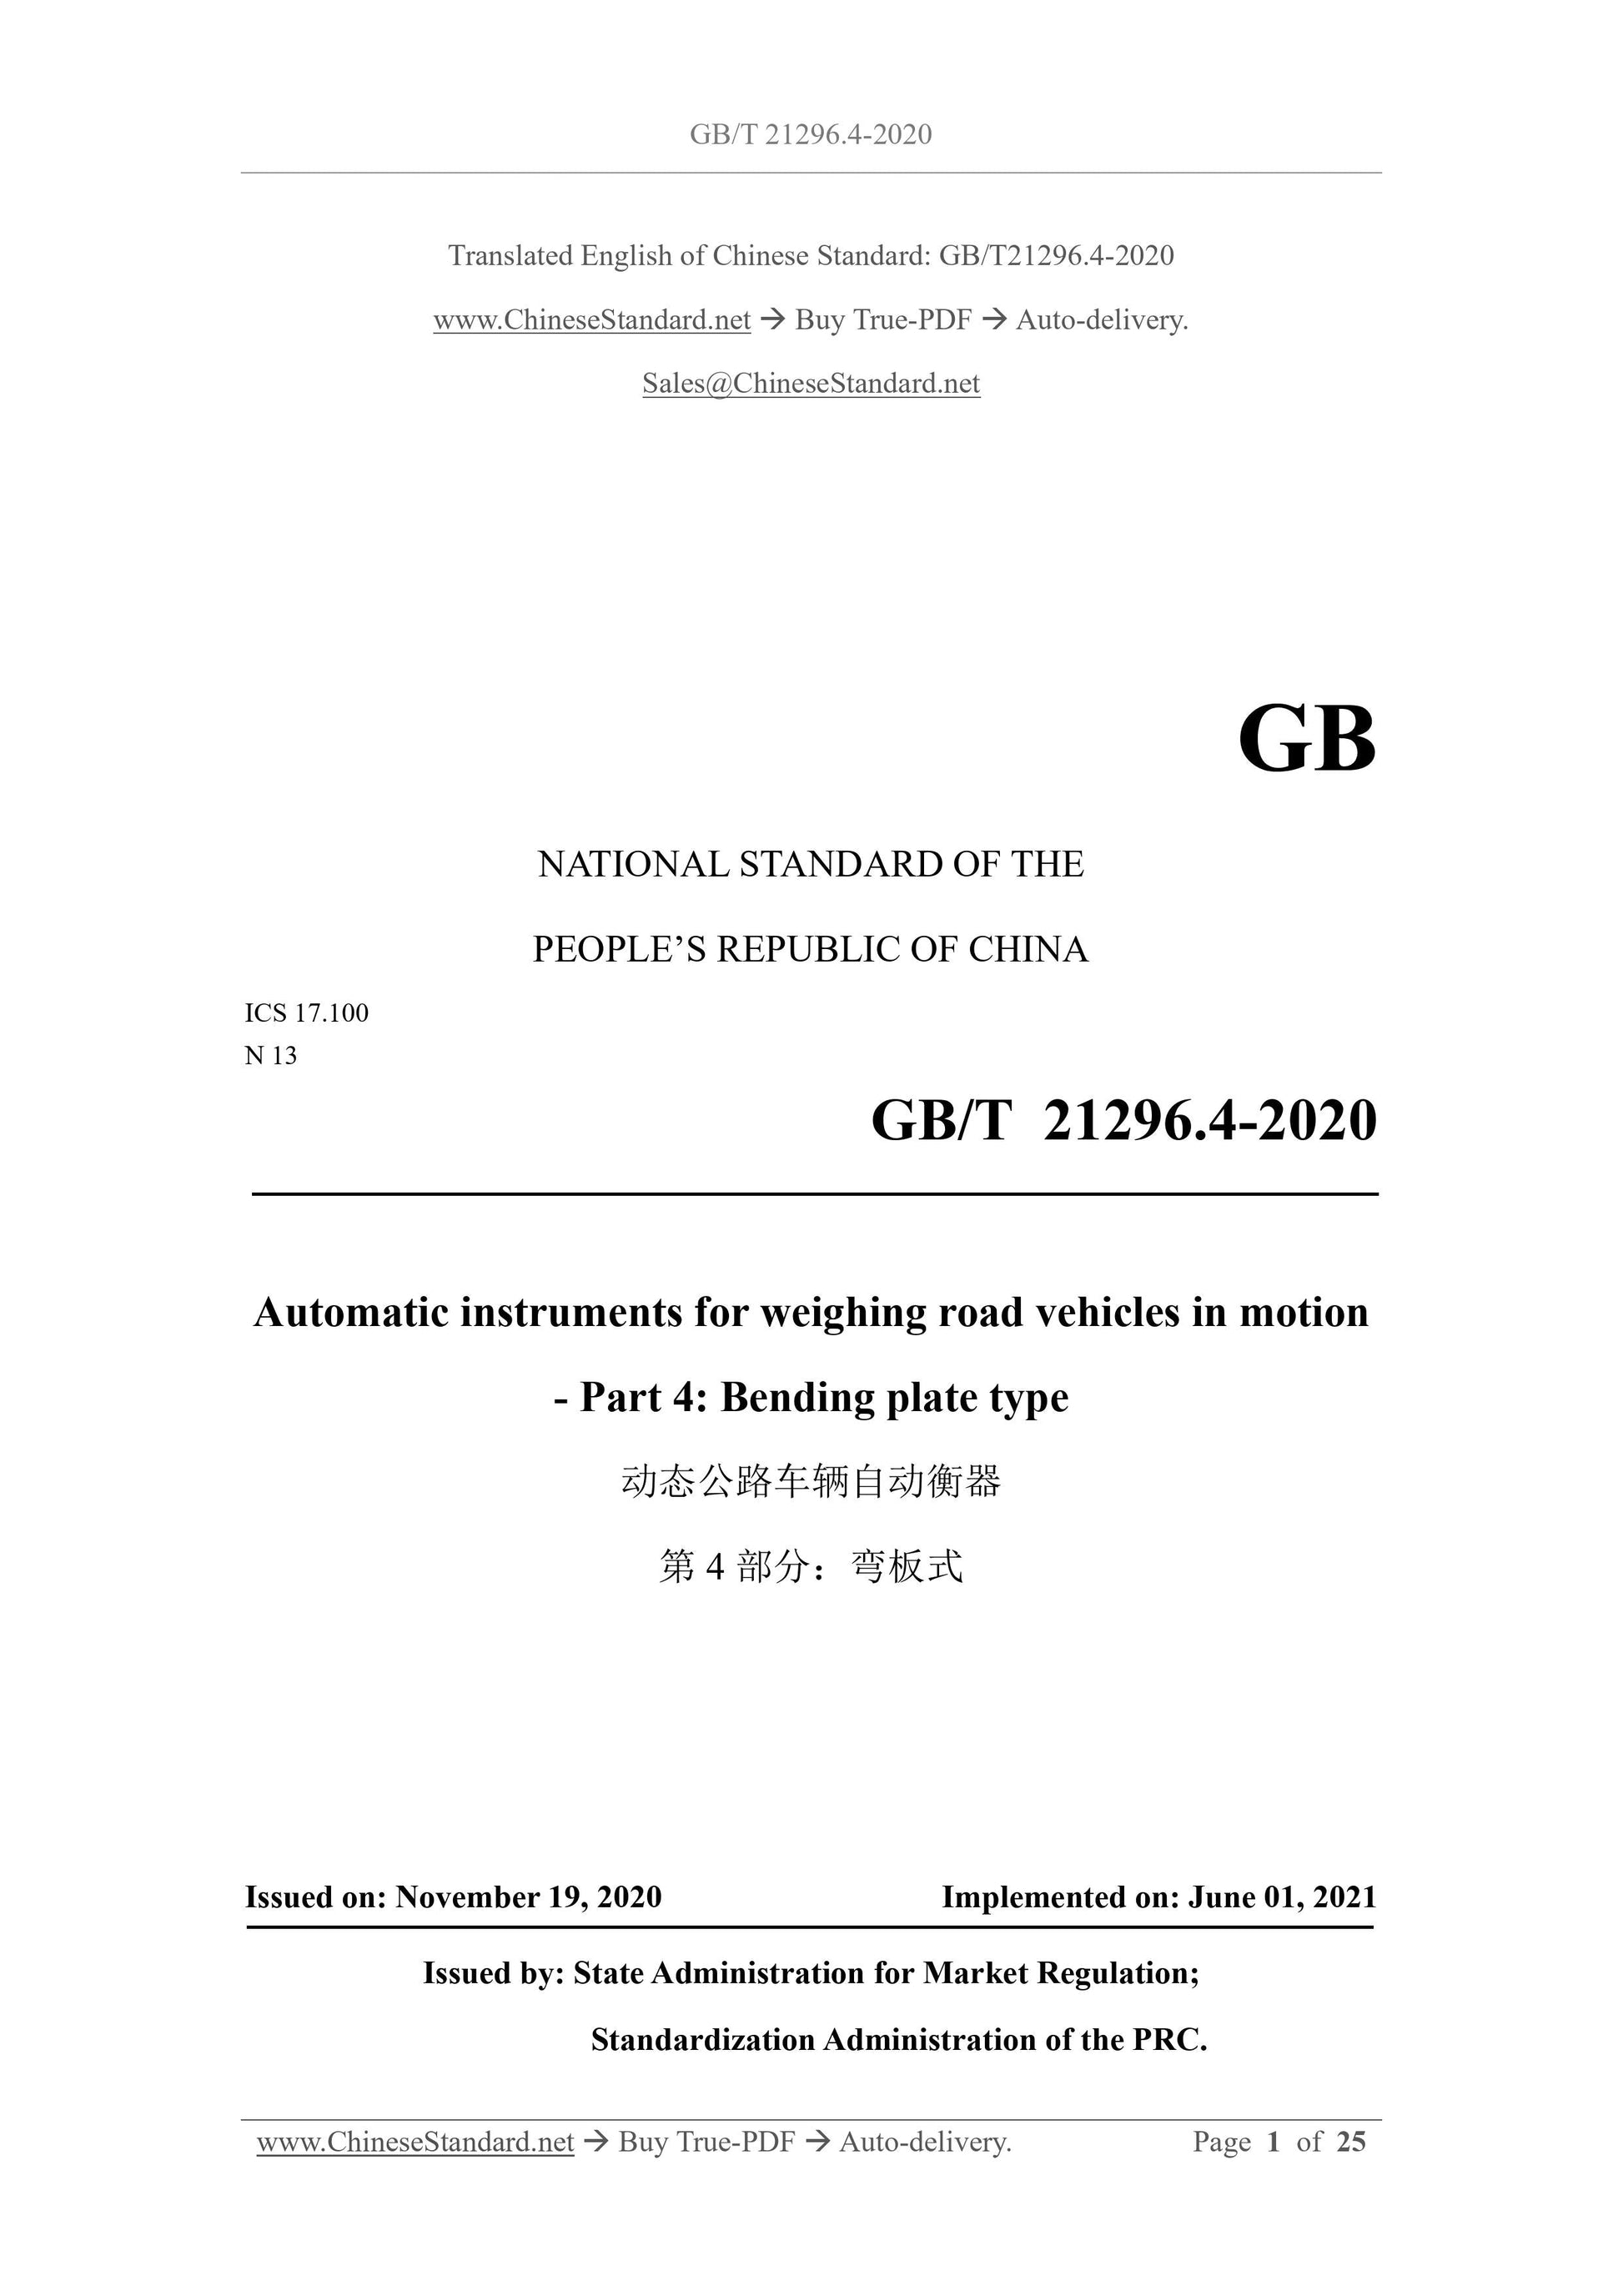 GB/T 21296.4-2020 Page 1